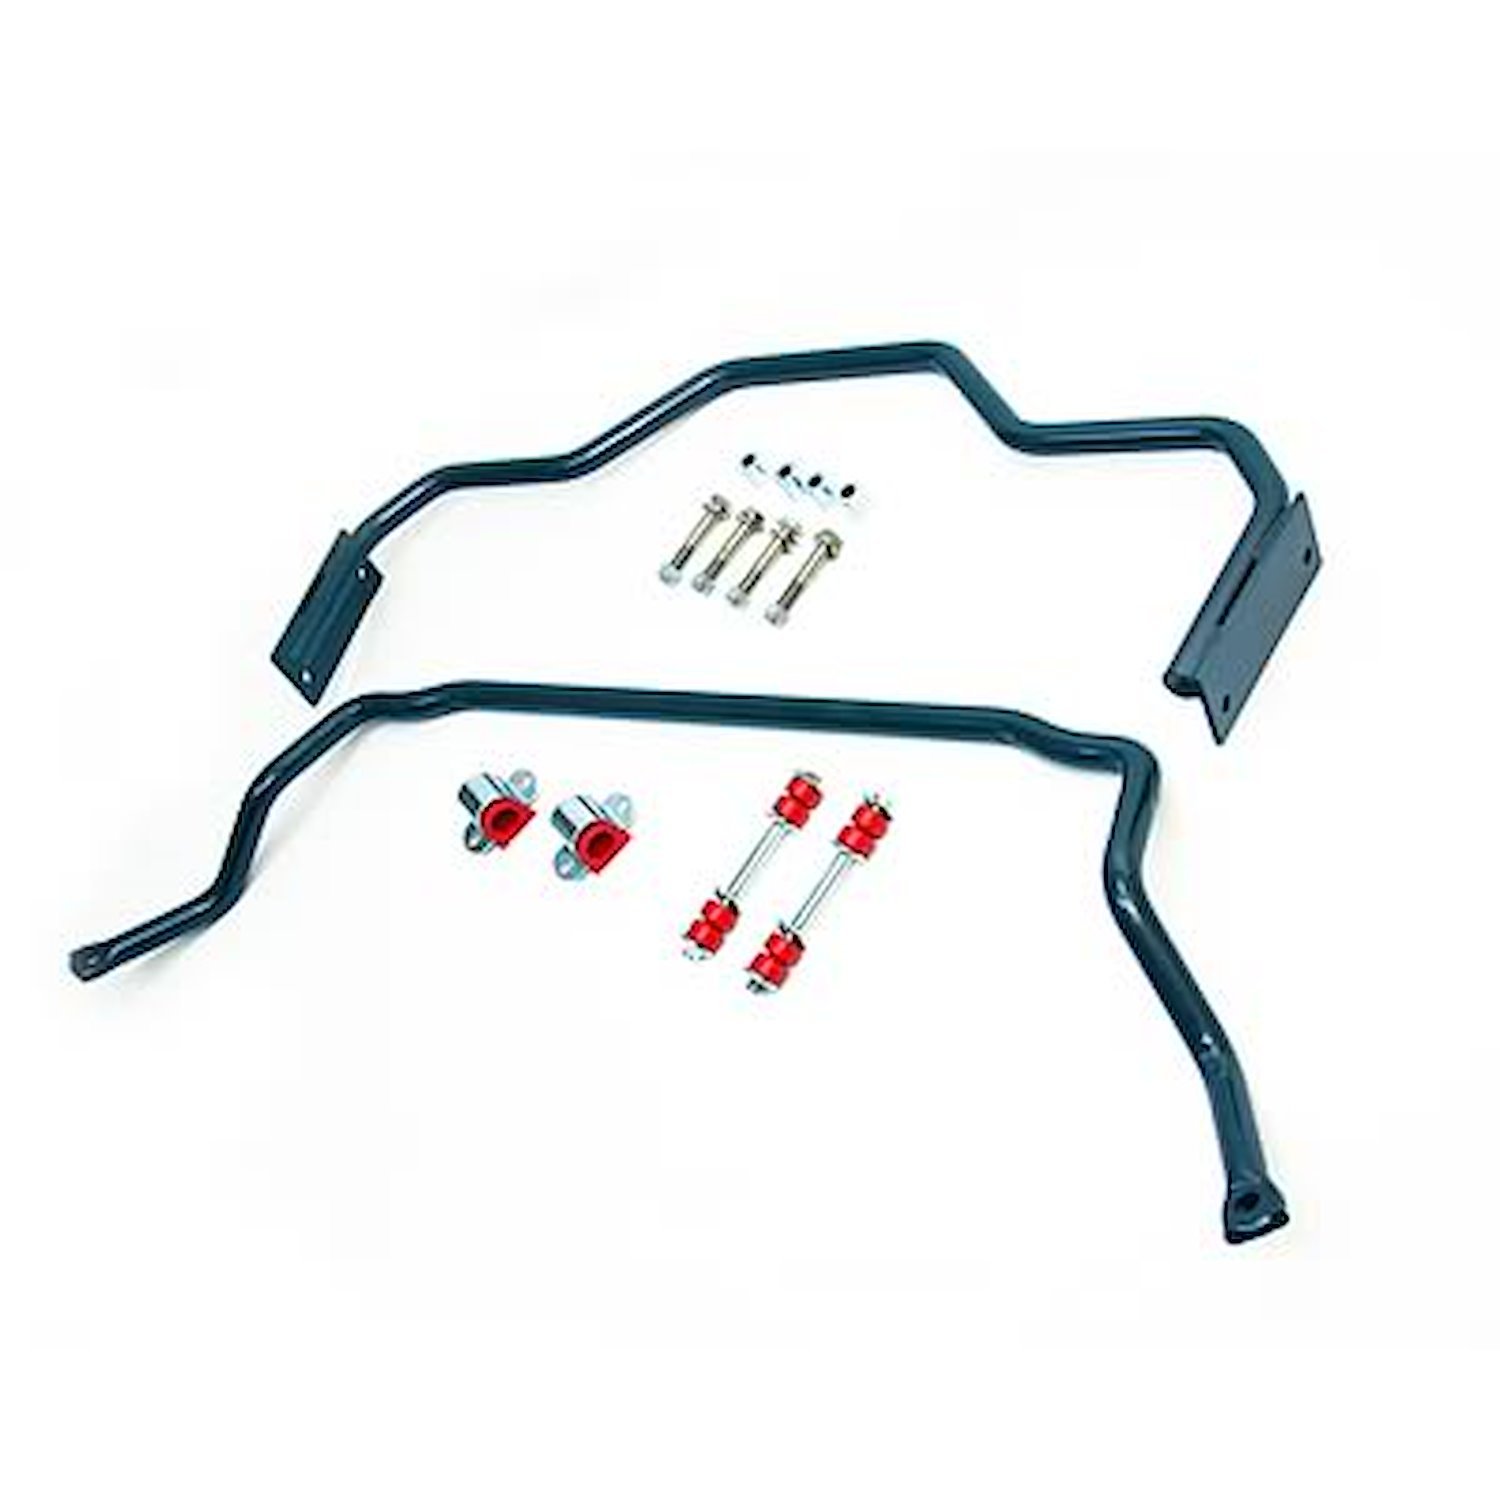 Sway Bar Set for 1978-1988 GM G-Body